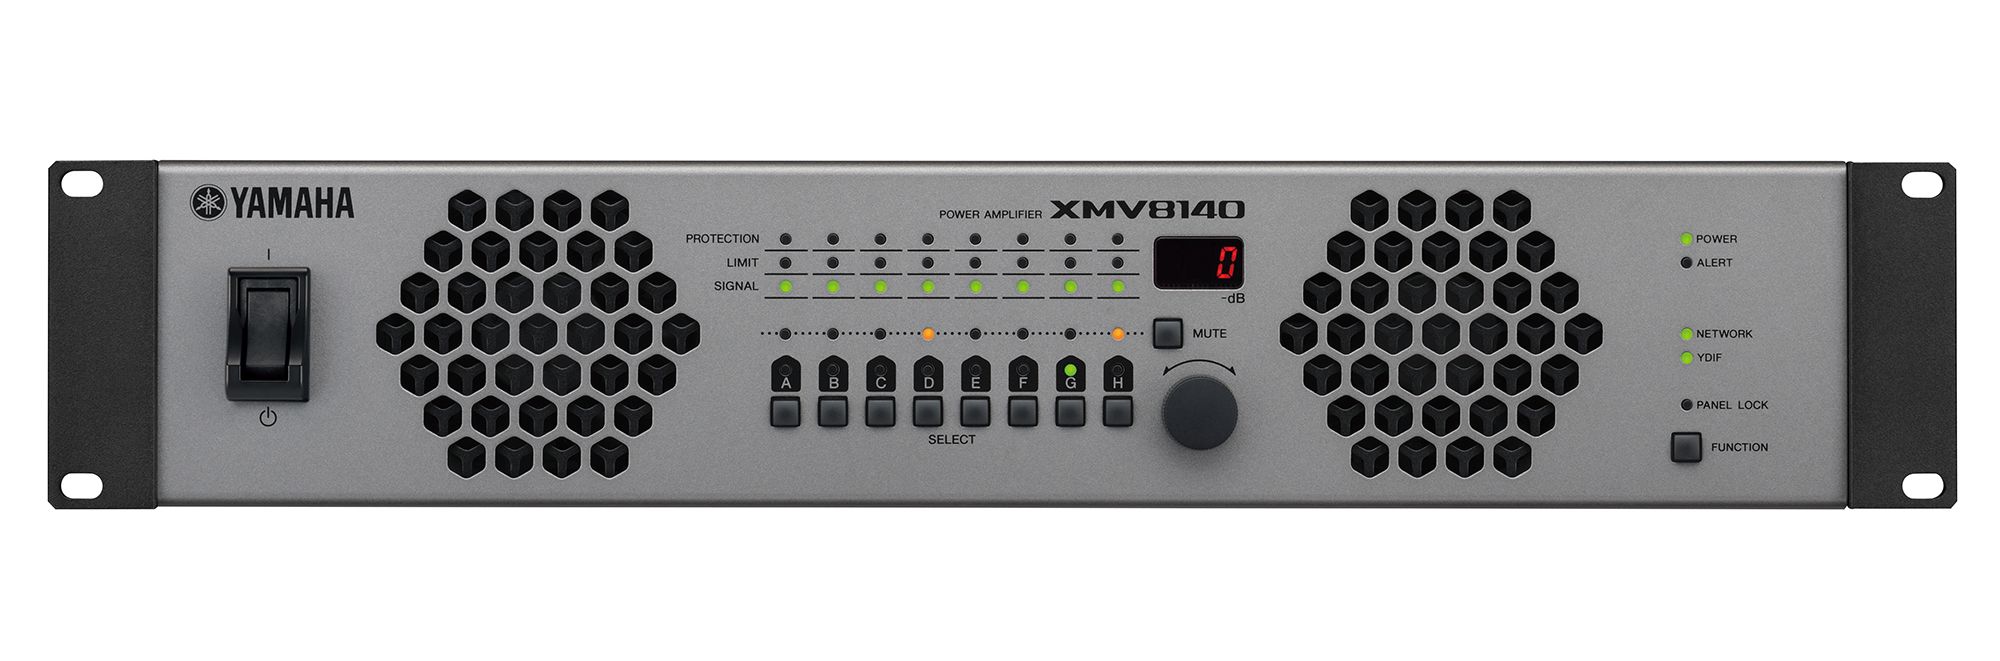 XMV Series - Overview - Power Amplifiers - Professional Audio 